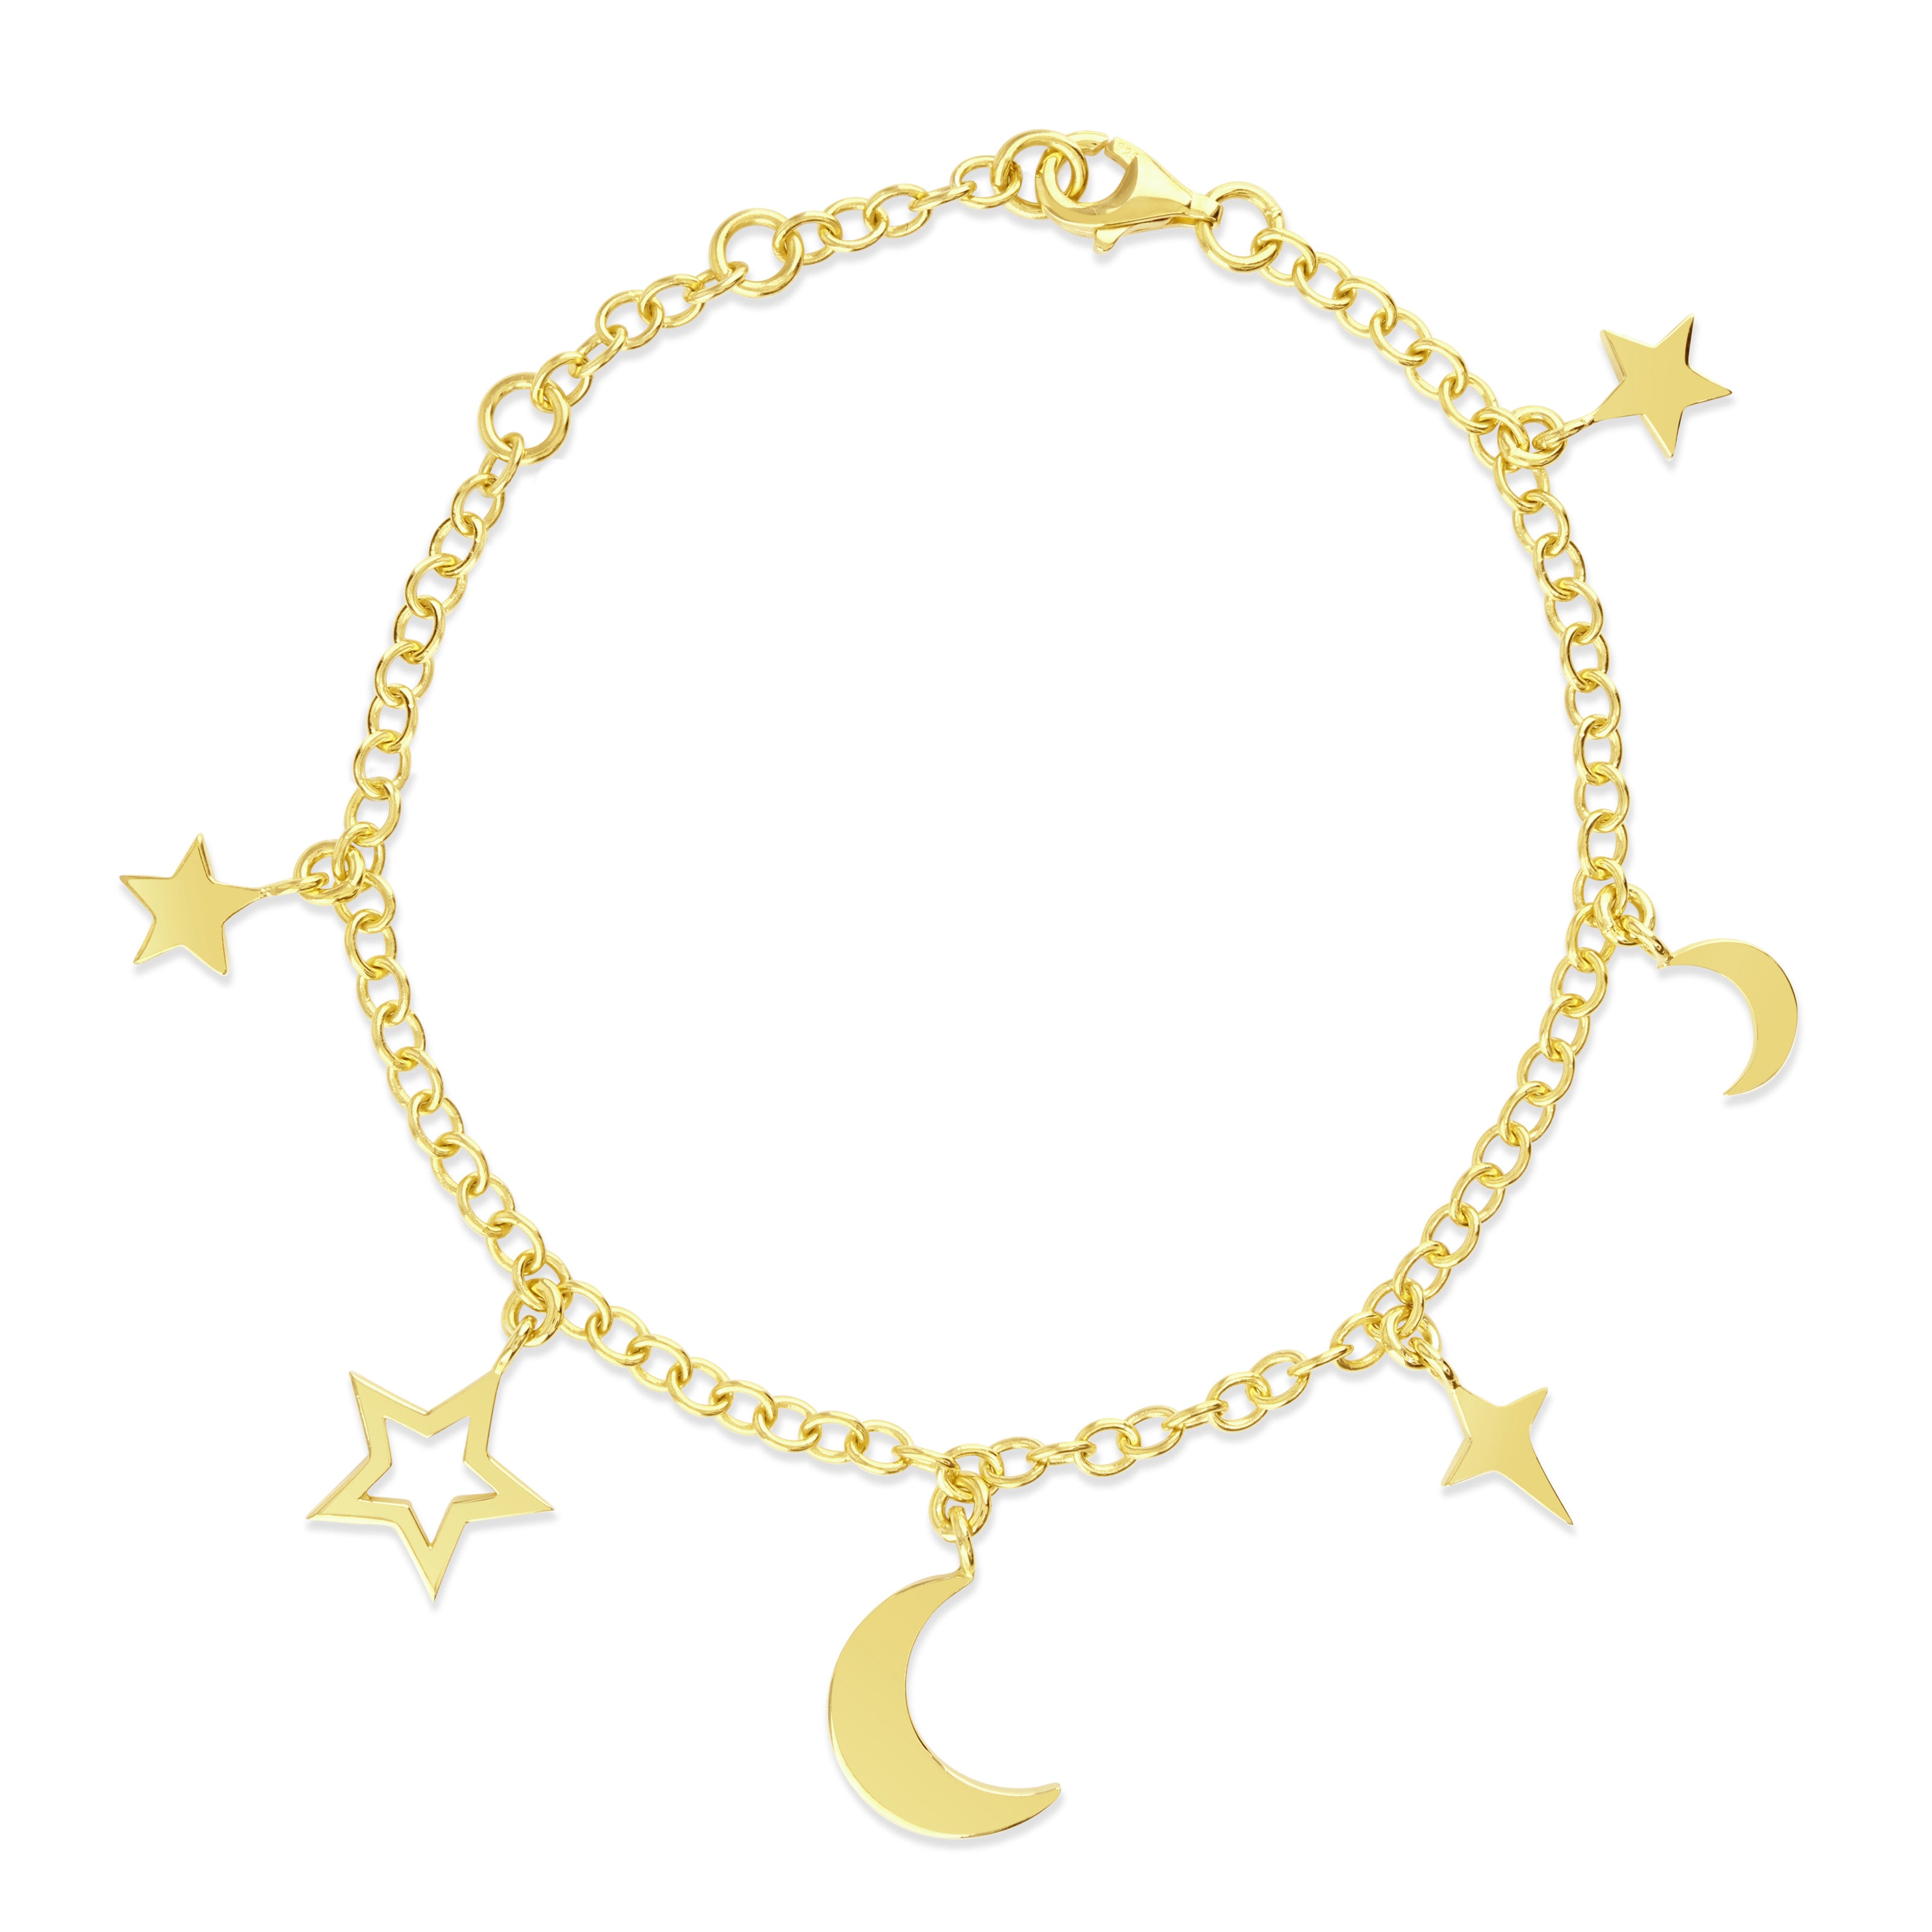 Gold Moon and Star Charm Bracelet